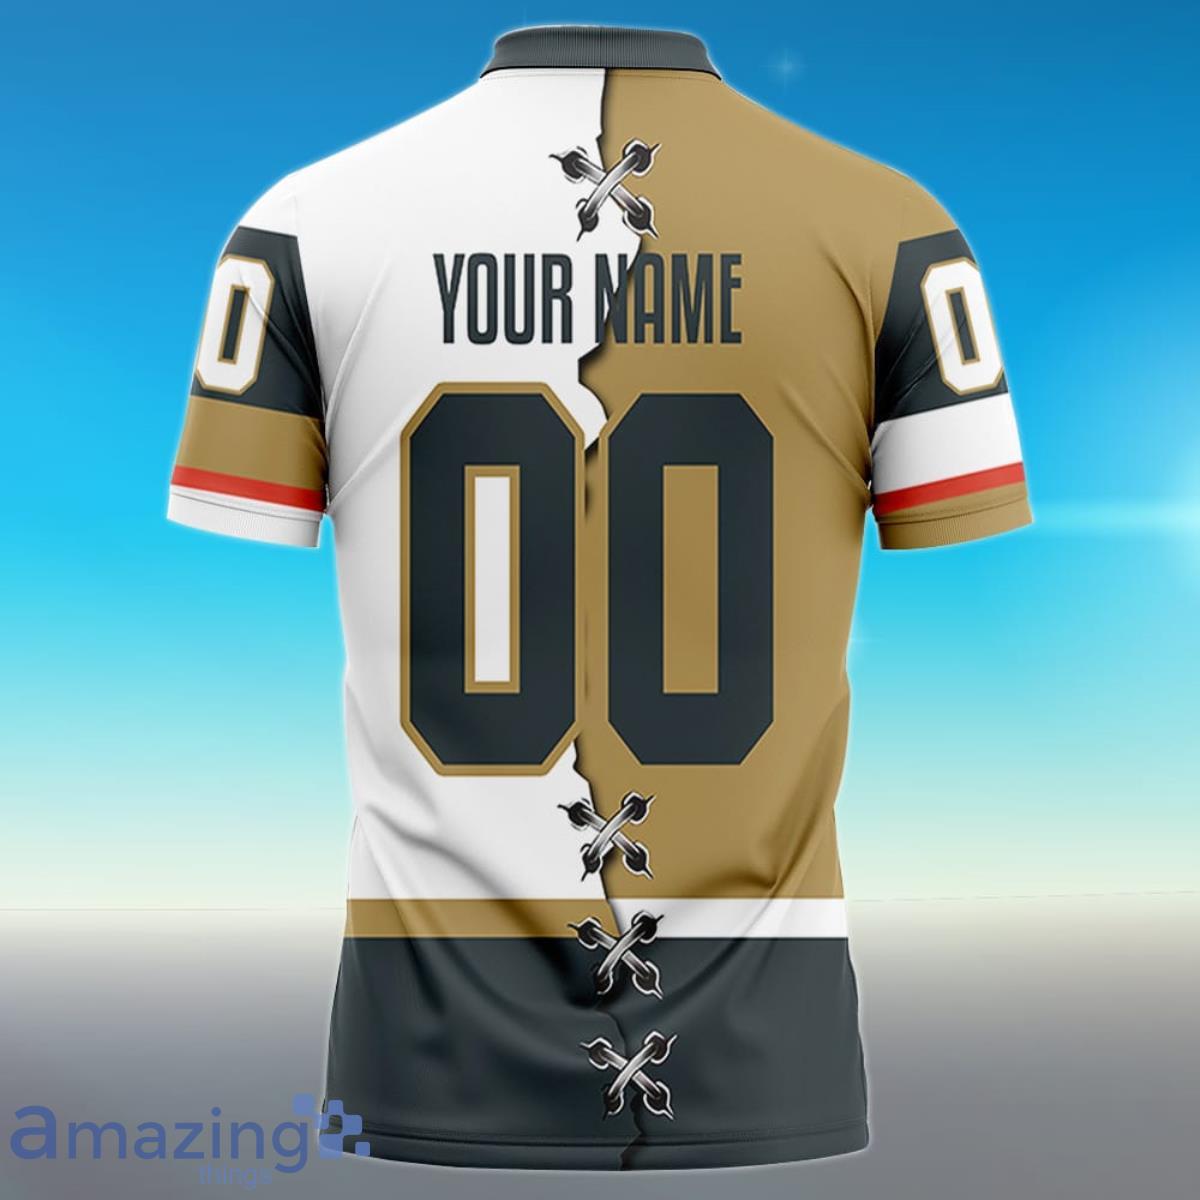 NHL Vegas Golden Knights Mix Jersey Custom Personalized Hoodie T